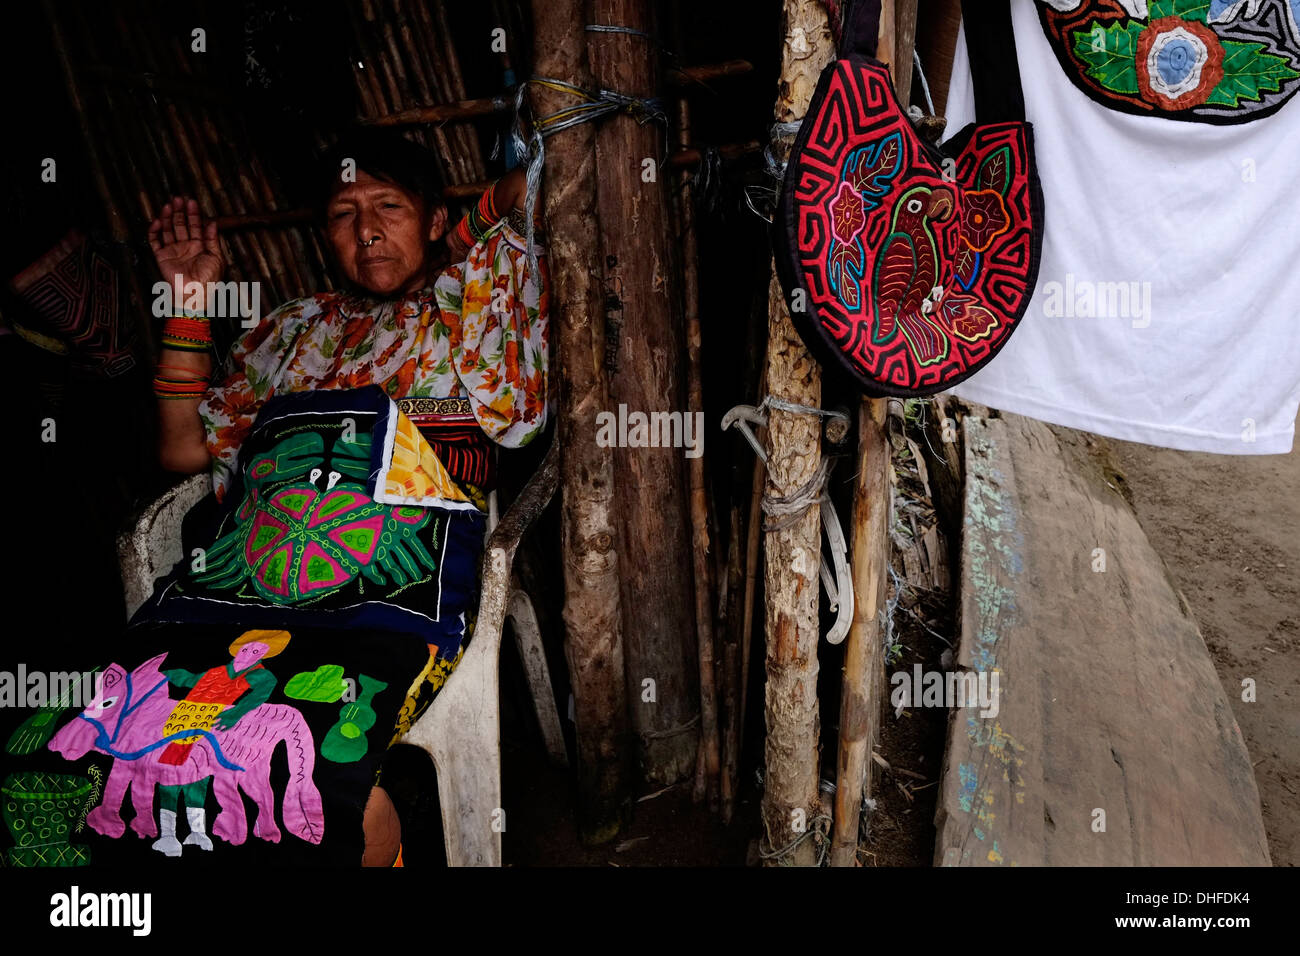 A woman from the Guna people displays a selection of traditional hand-made molas for sale at her home in Carti Sugtupu island village administered by Guna natives known as Kuna in the 'Comarca' (region) of the Guna Yala located in the archipelago of San Blas Blas islands in the Northeast of Panama facing the Caribbean Sea. Stock Photo